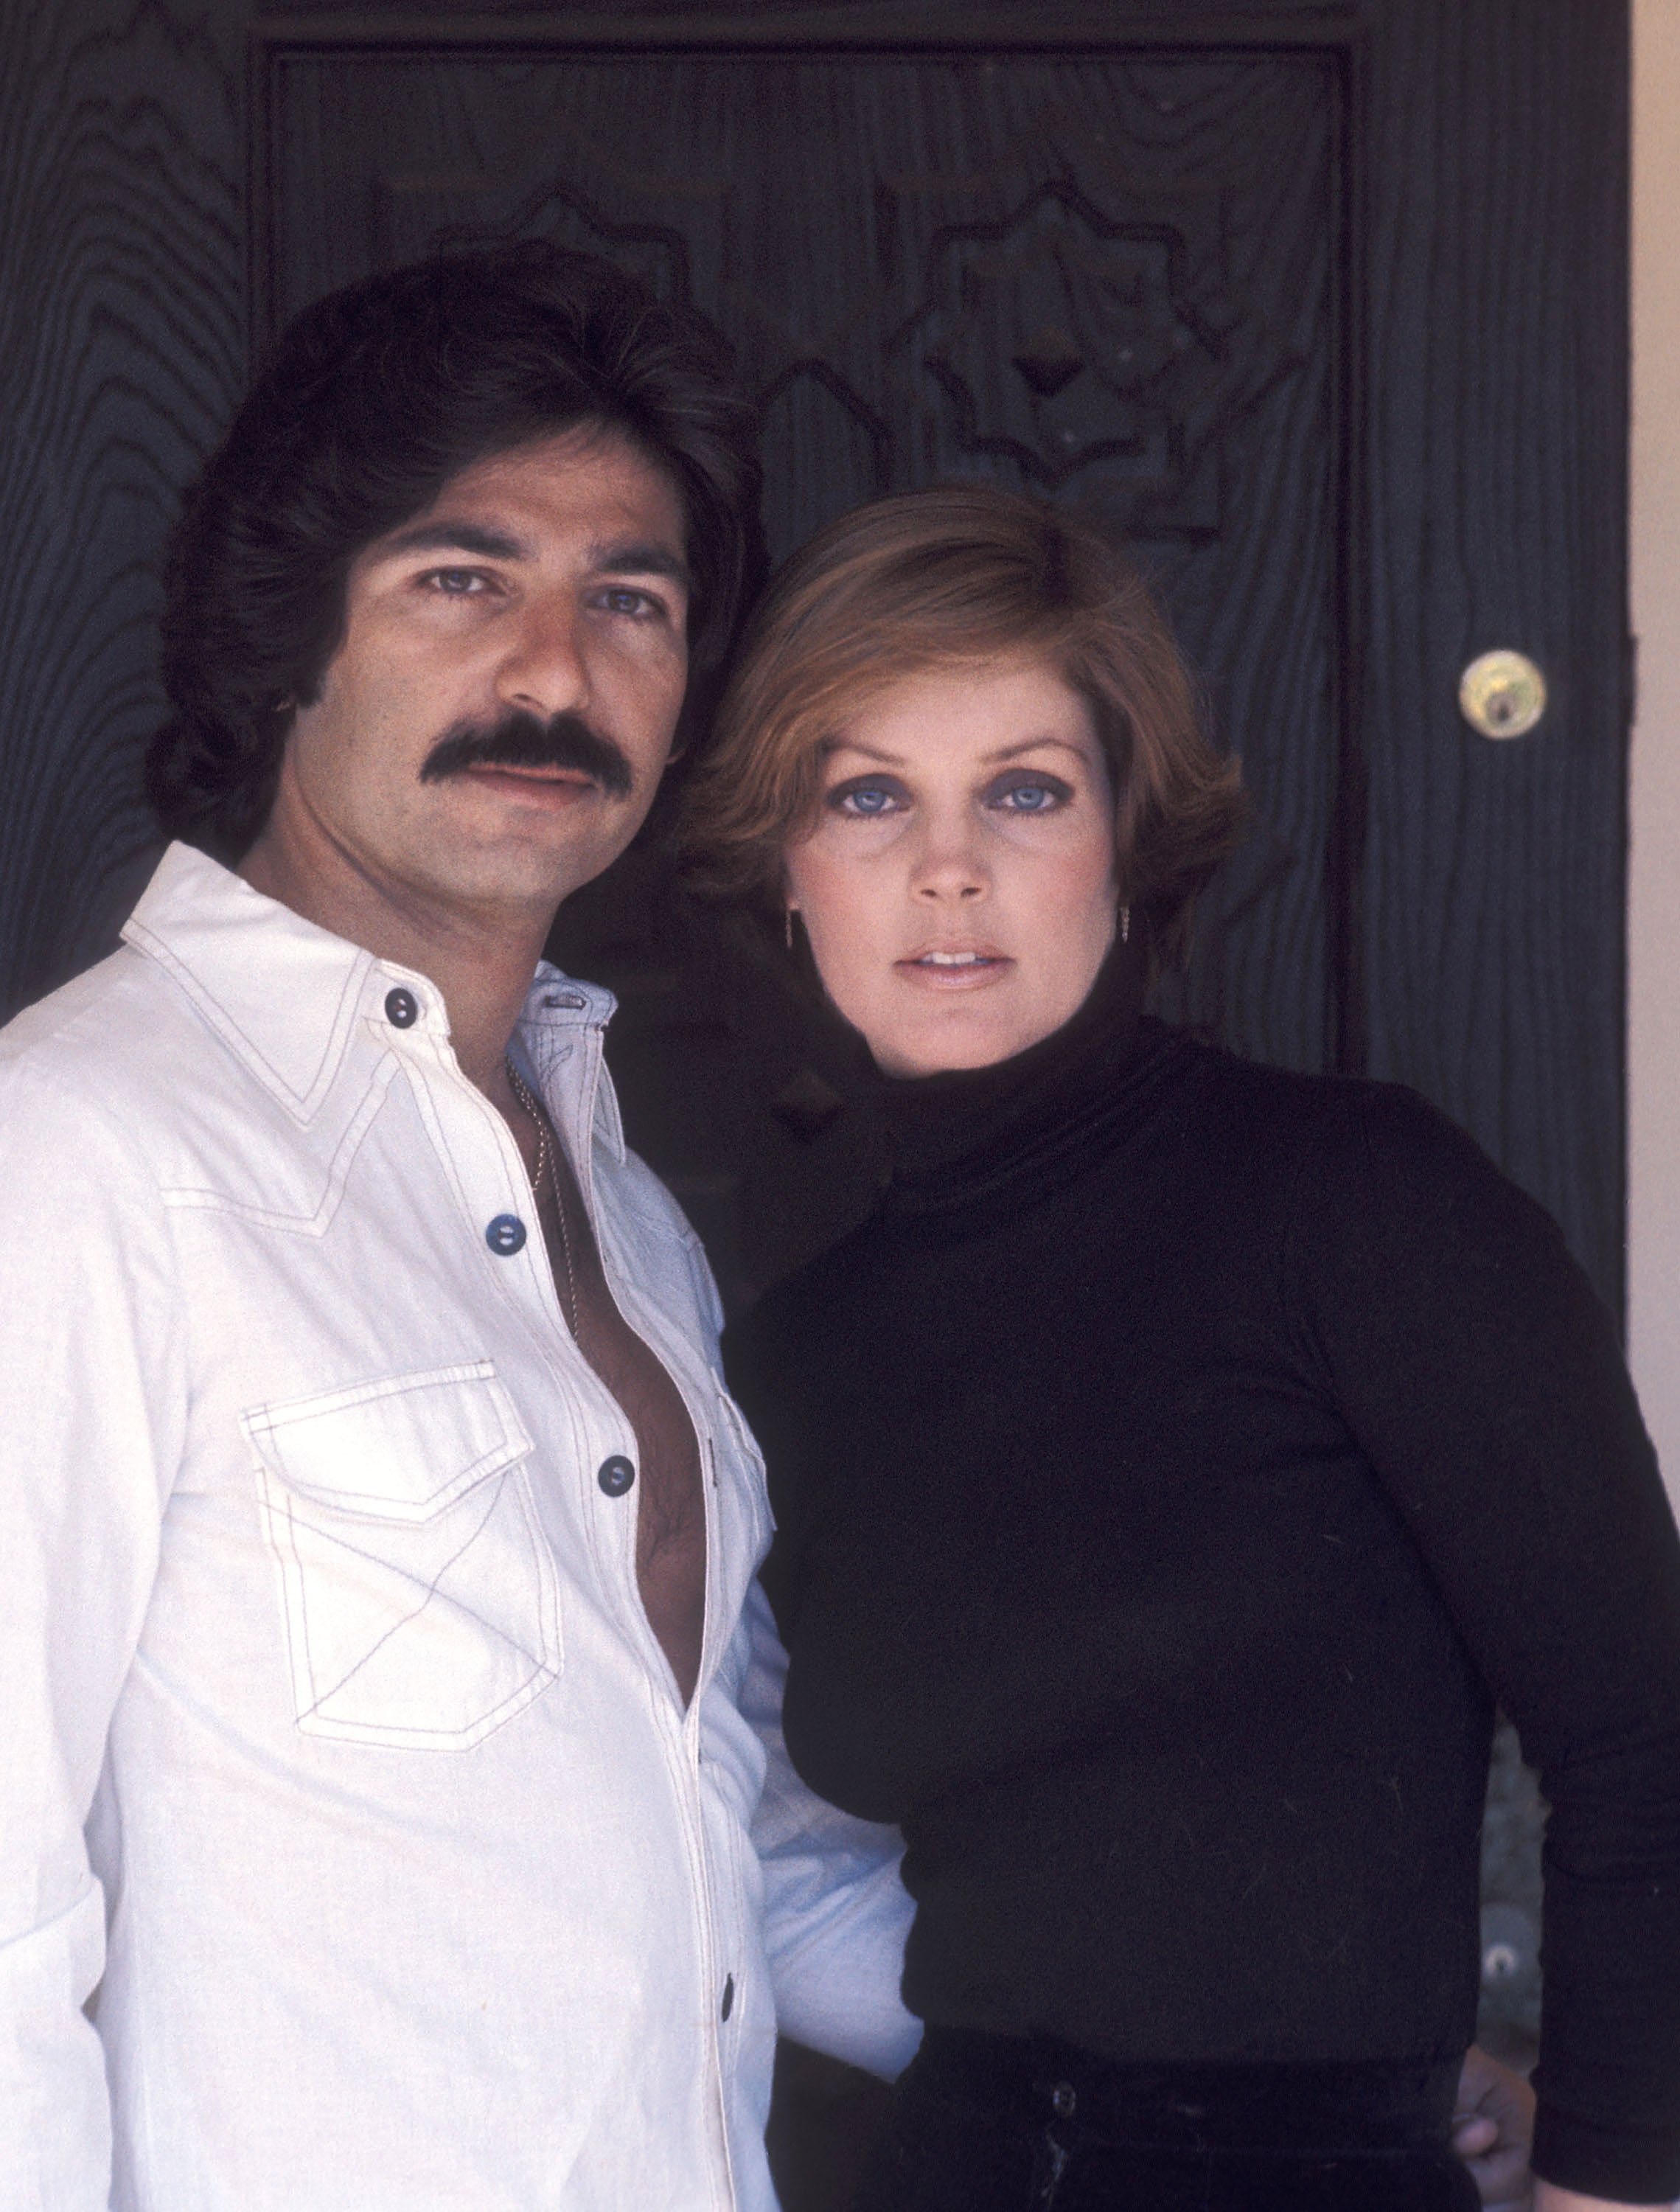 Priscilla Presley and Robert Kardashian posing for photographs at her home on March 27, 1976 | Source: Getty Images